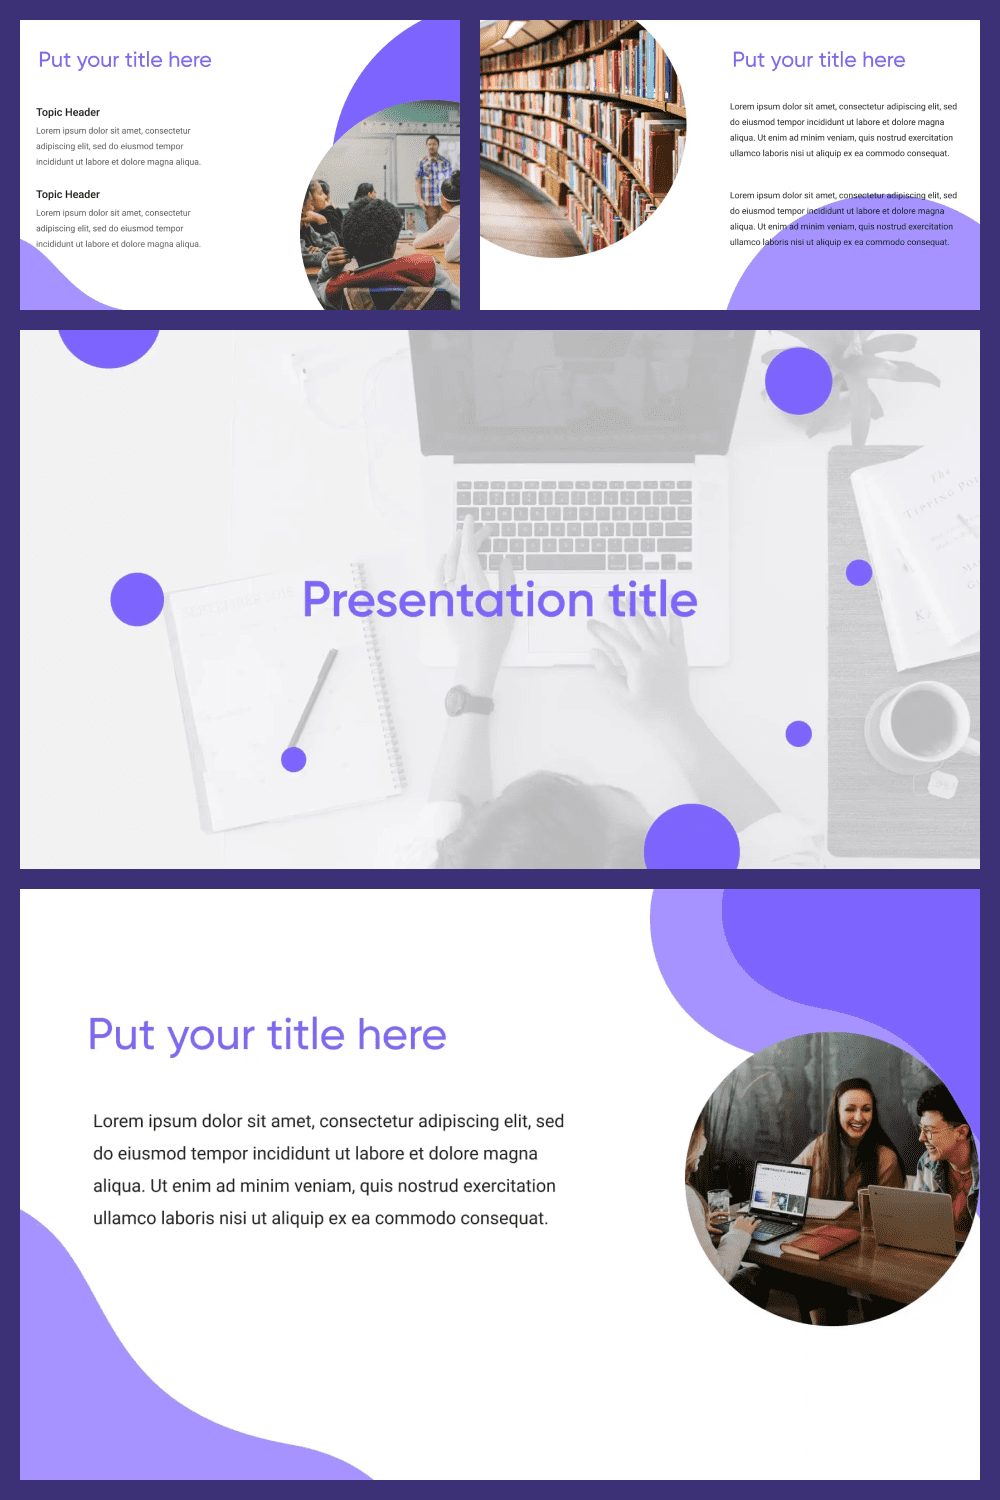 Free Education PowerPoint Templates For Teachers.